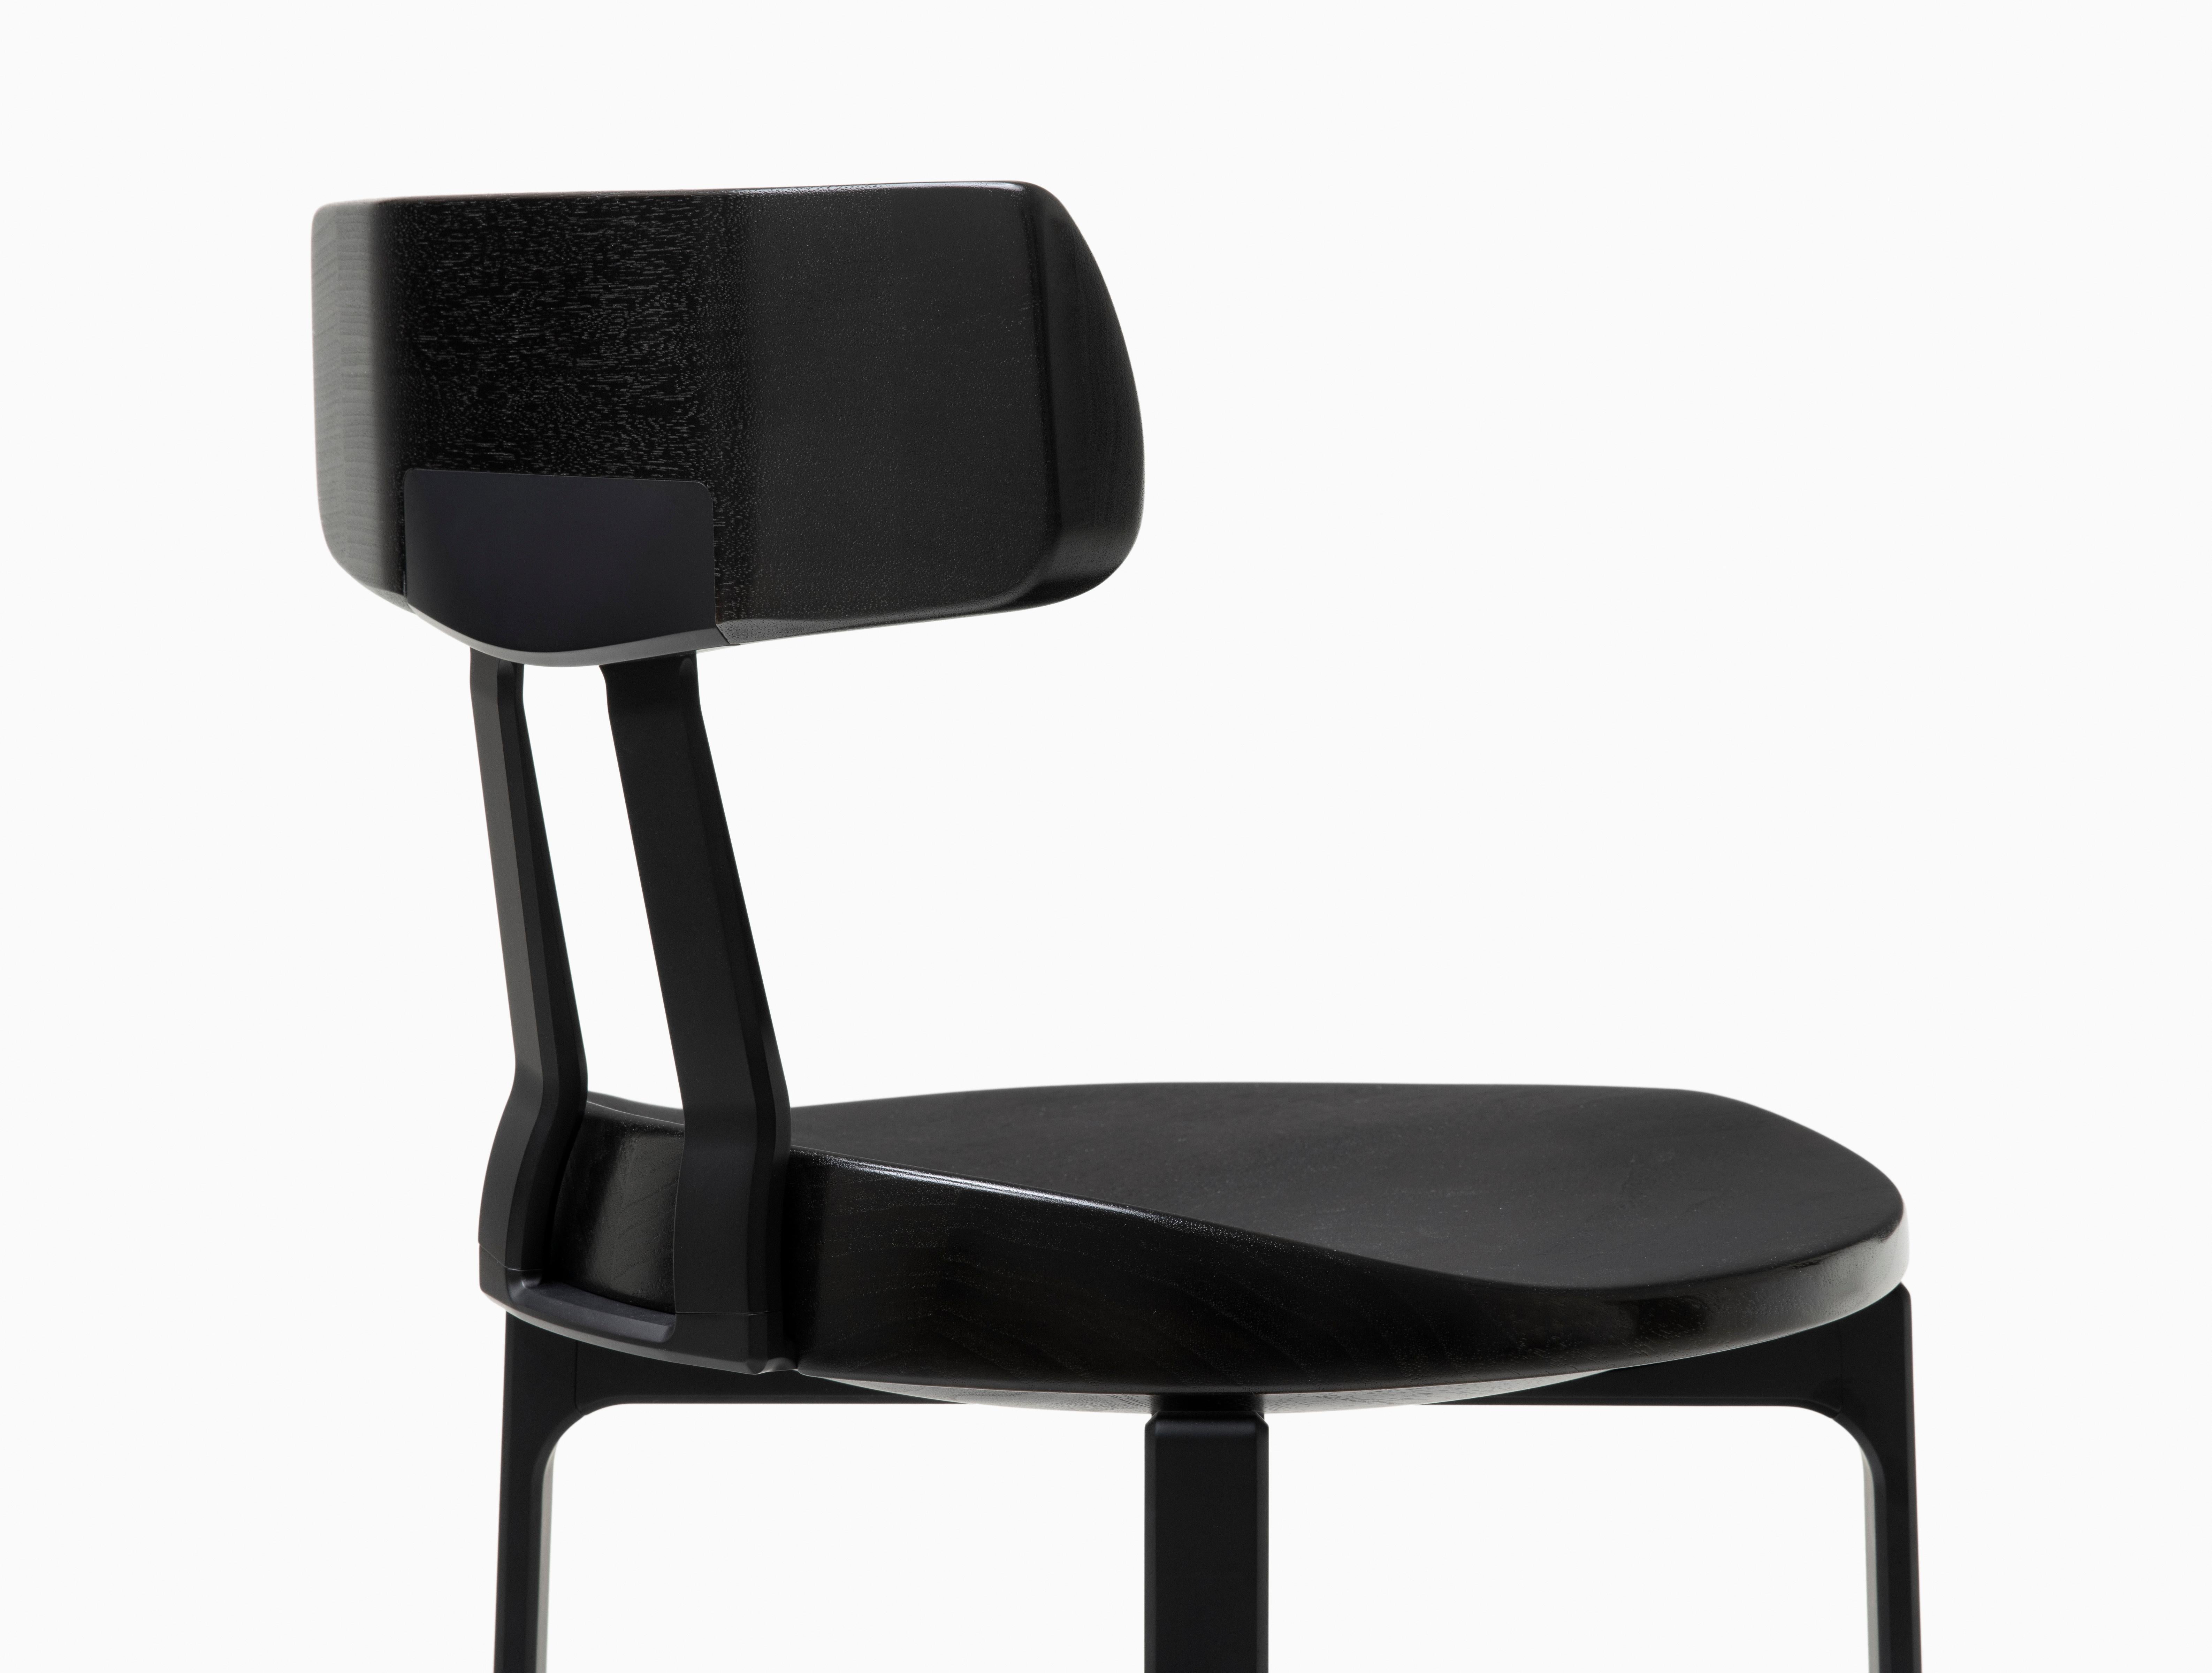 HOLLY HUNT Pepper counter stool with backrest in black walnut and aluminum frame. Unusual yet innovative, the Pepper Counter stool design was inspired by the sectioned appearance of a sliced bell pepper. Advanced aluminum crafting techniques were